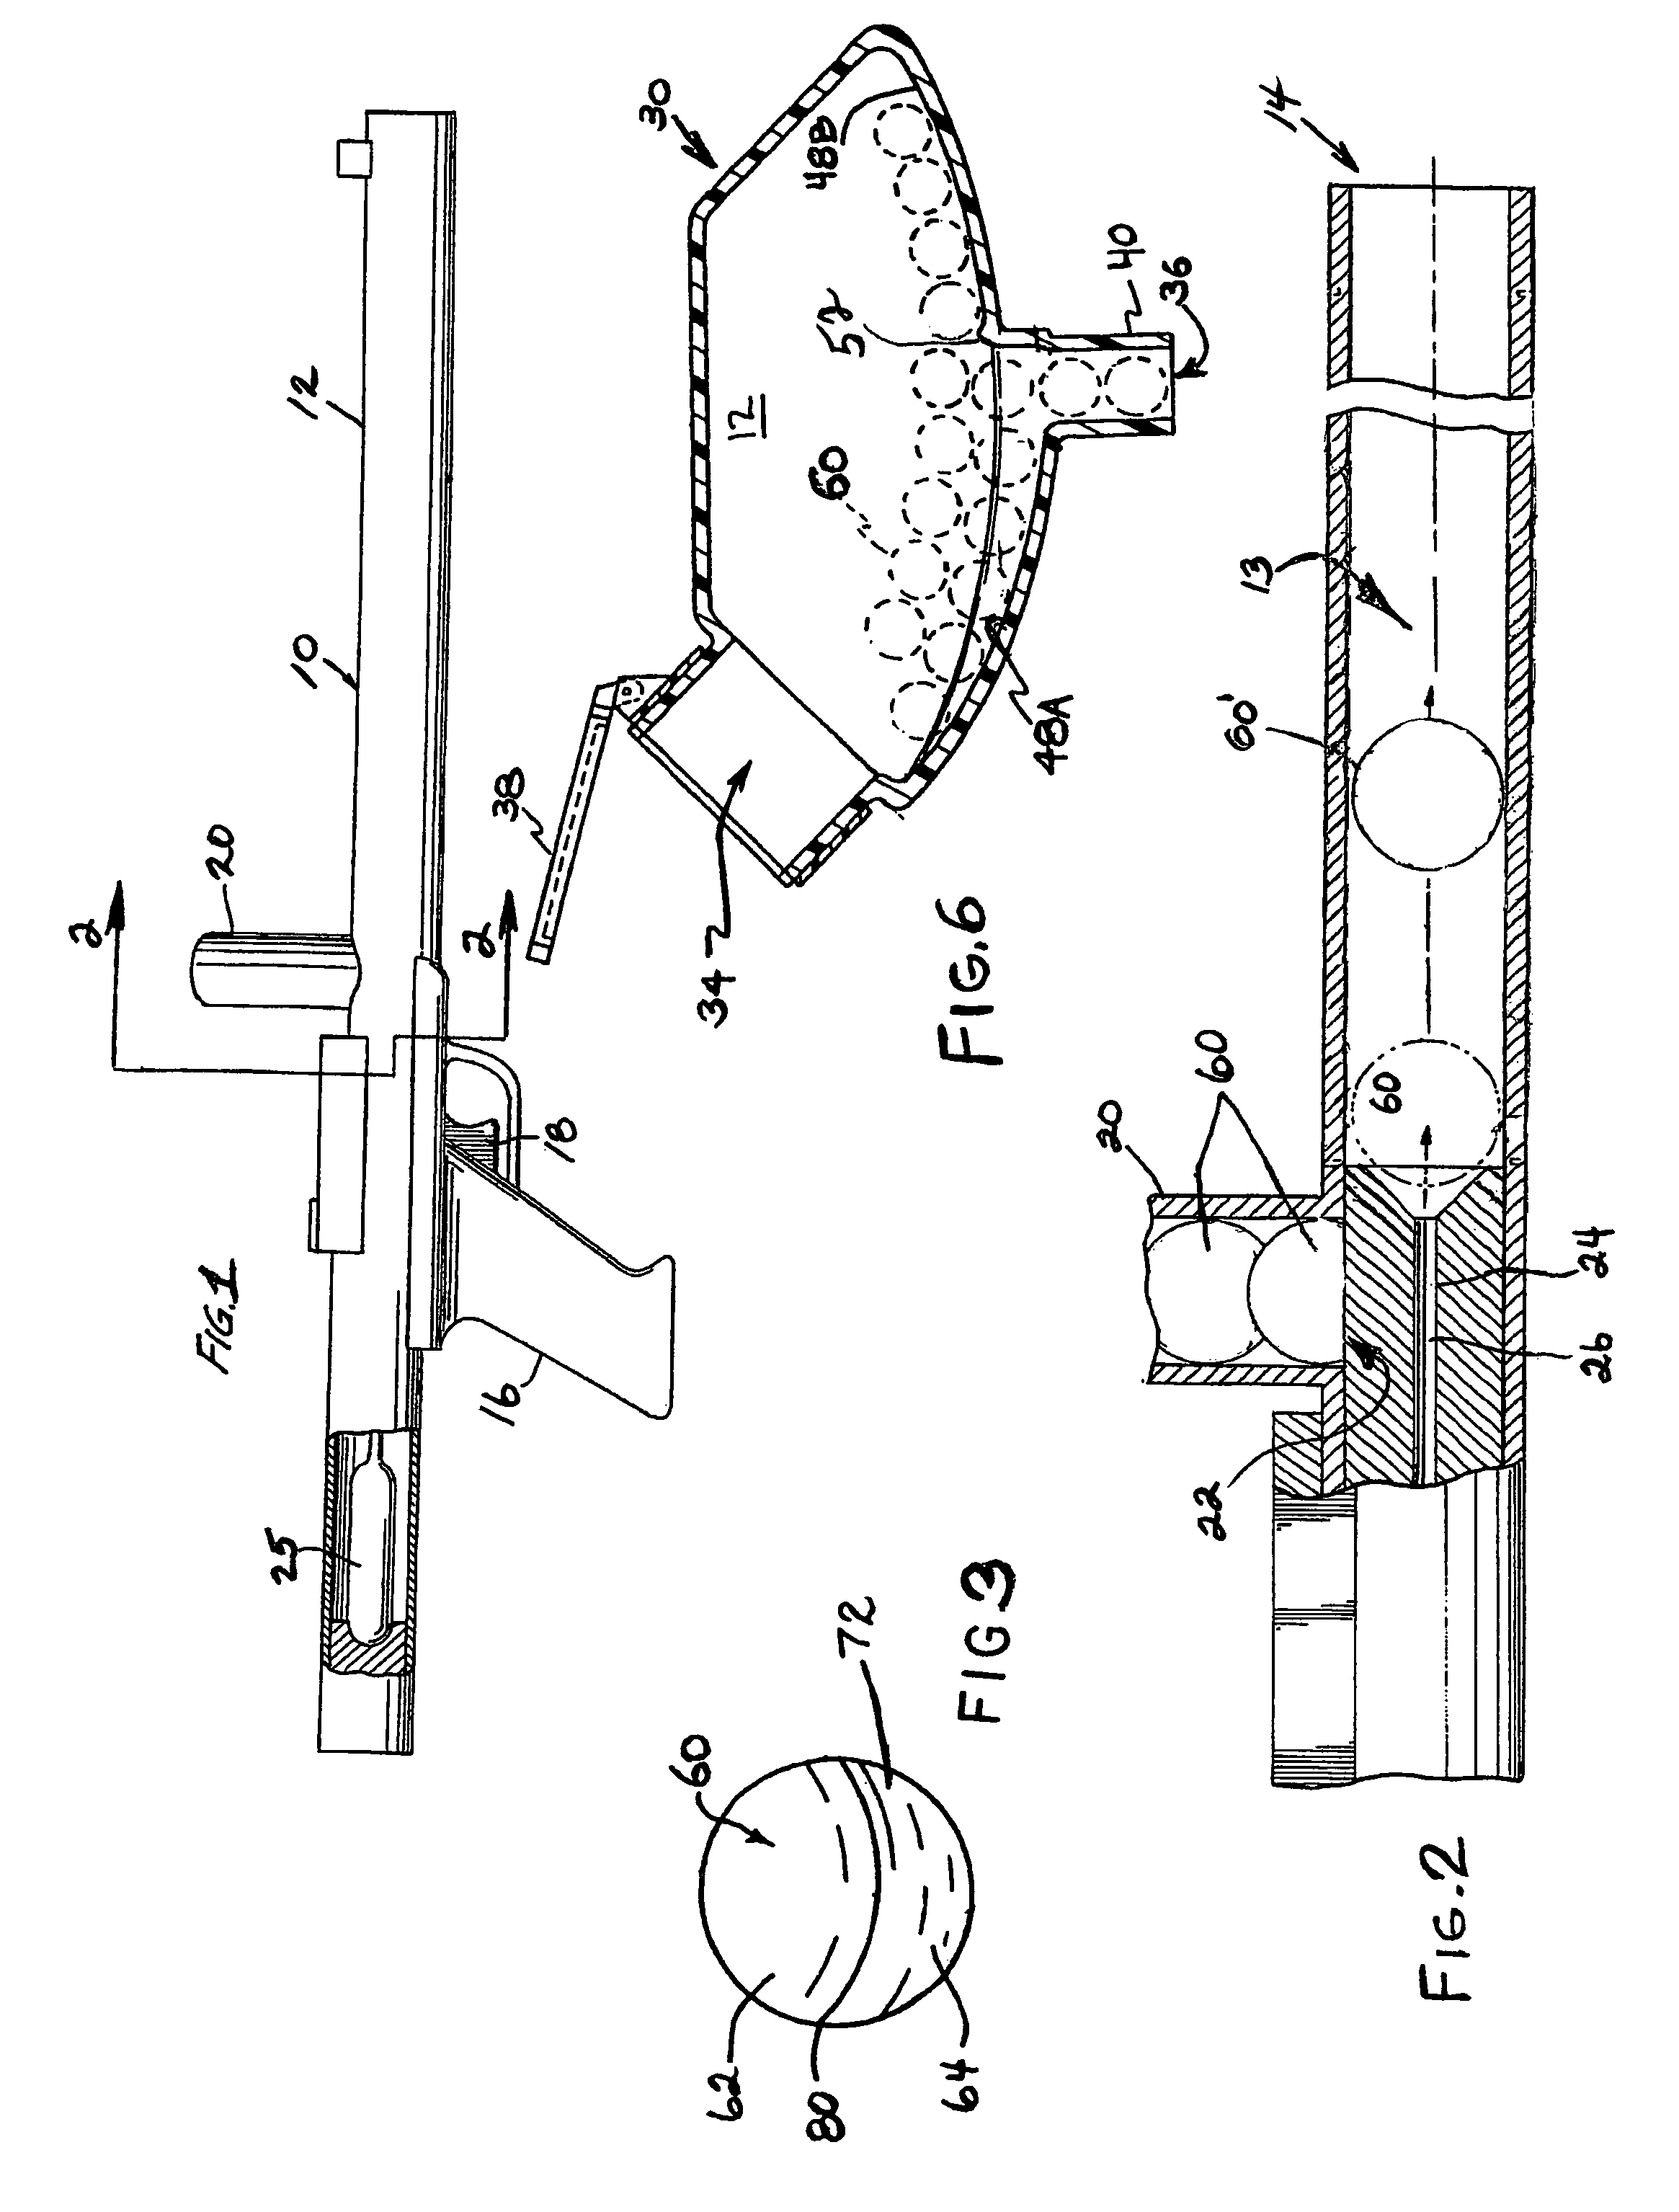 Method and system for controlling small wild animals and rodents